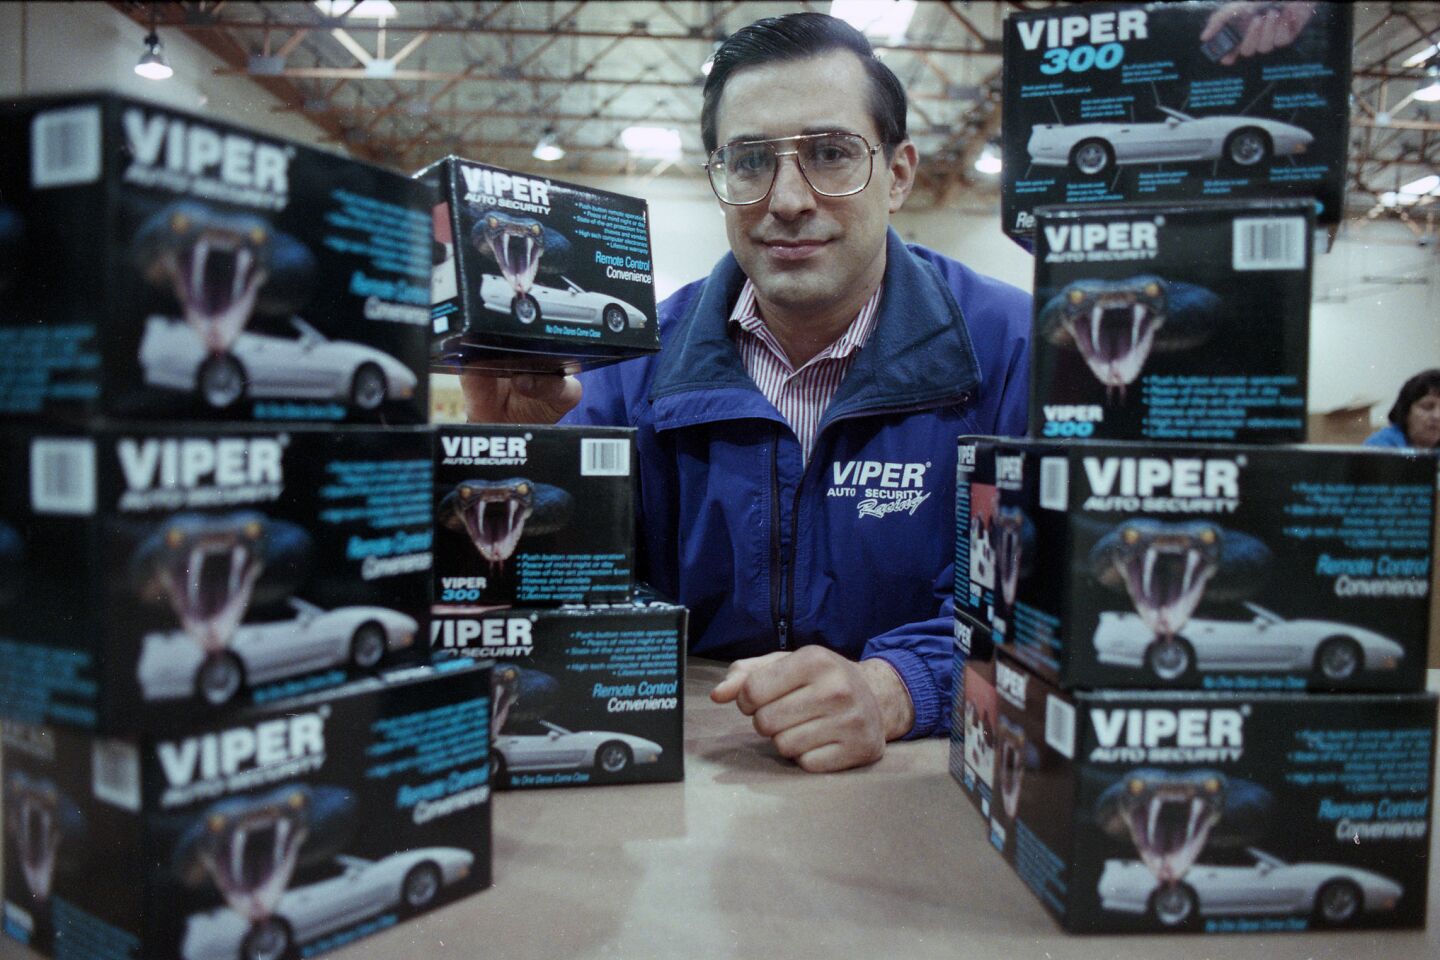 This 1992 file photo shows Darrell Issa, president of Directed Electronics Inc., with the company Viper brand radar detectors. Issa bought a struggling Cleveland electronics business and within a decade transformed it to produce the popular Viper automobile anti-theft device, with Issa's voice as the warning to would-be thieves to "stand back." He and his wife, Kathy, moved to Vista in 1985.